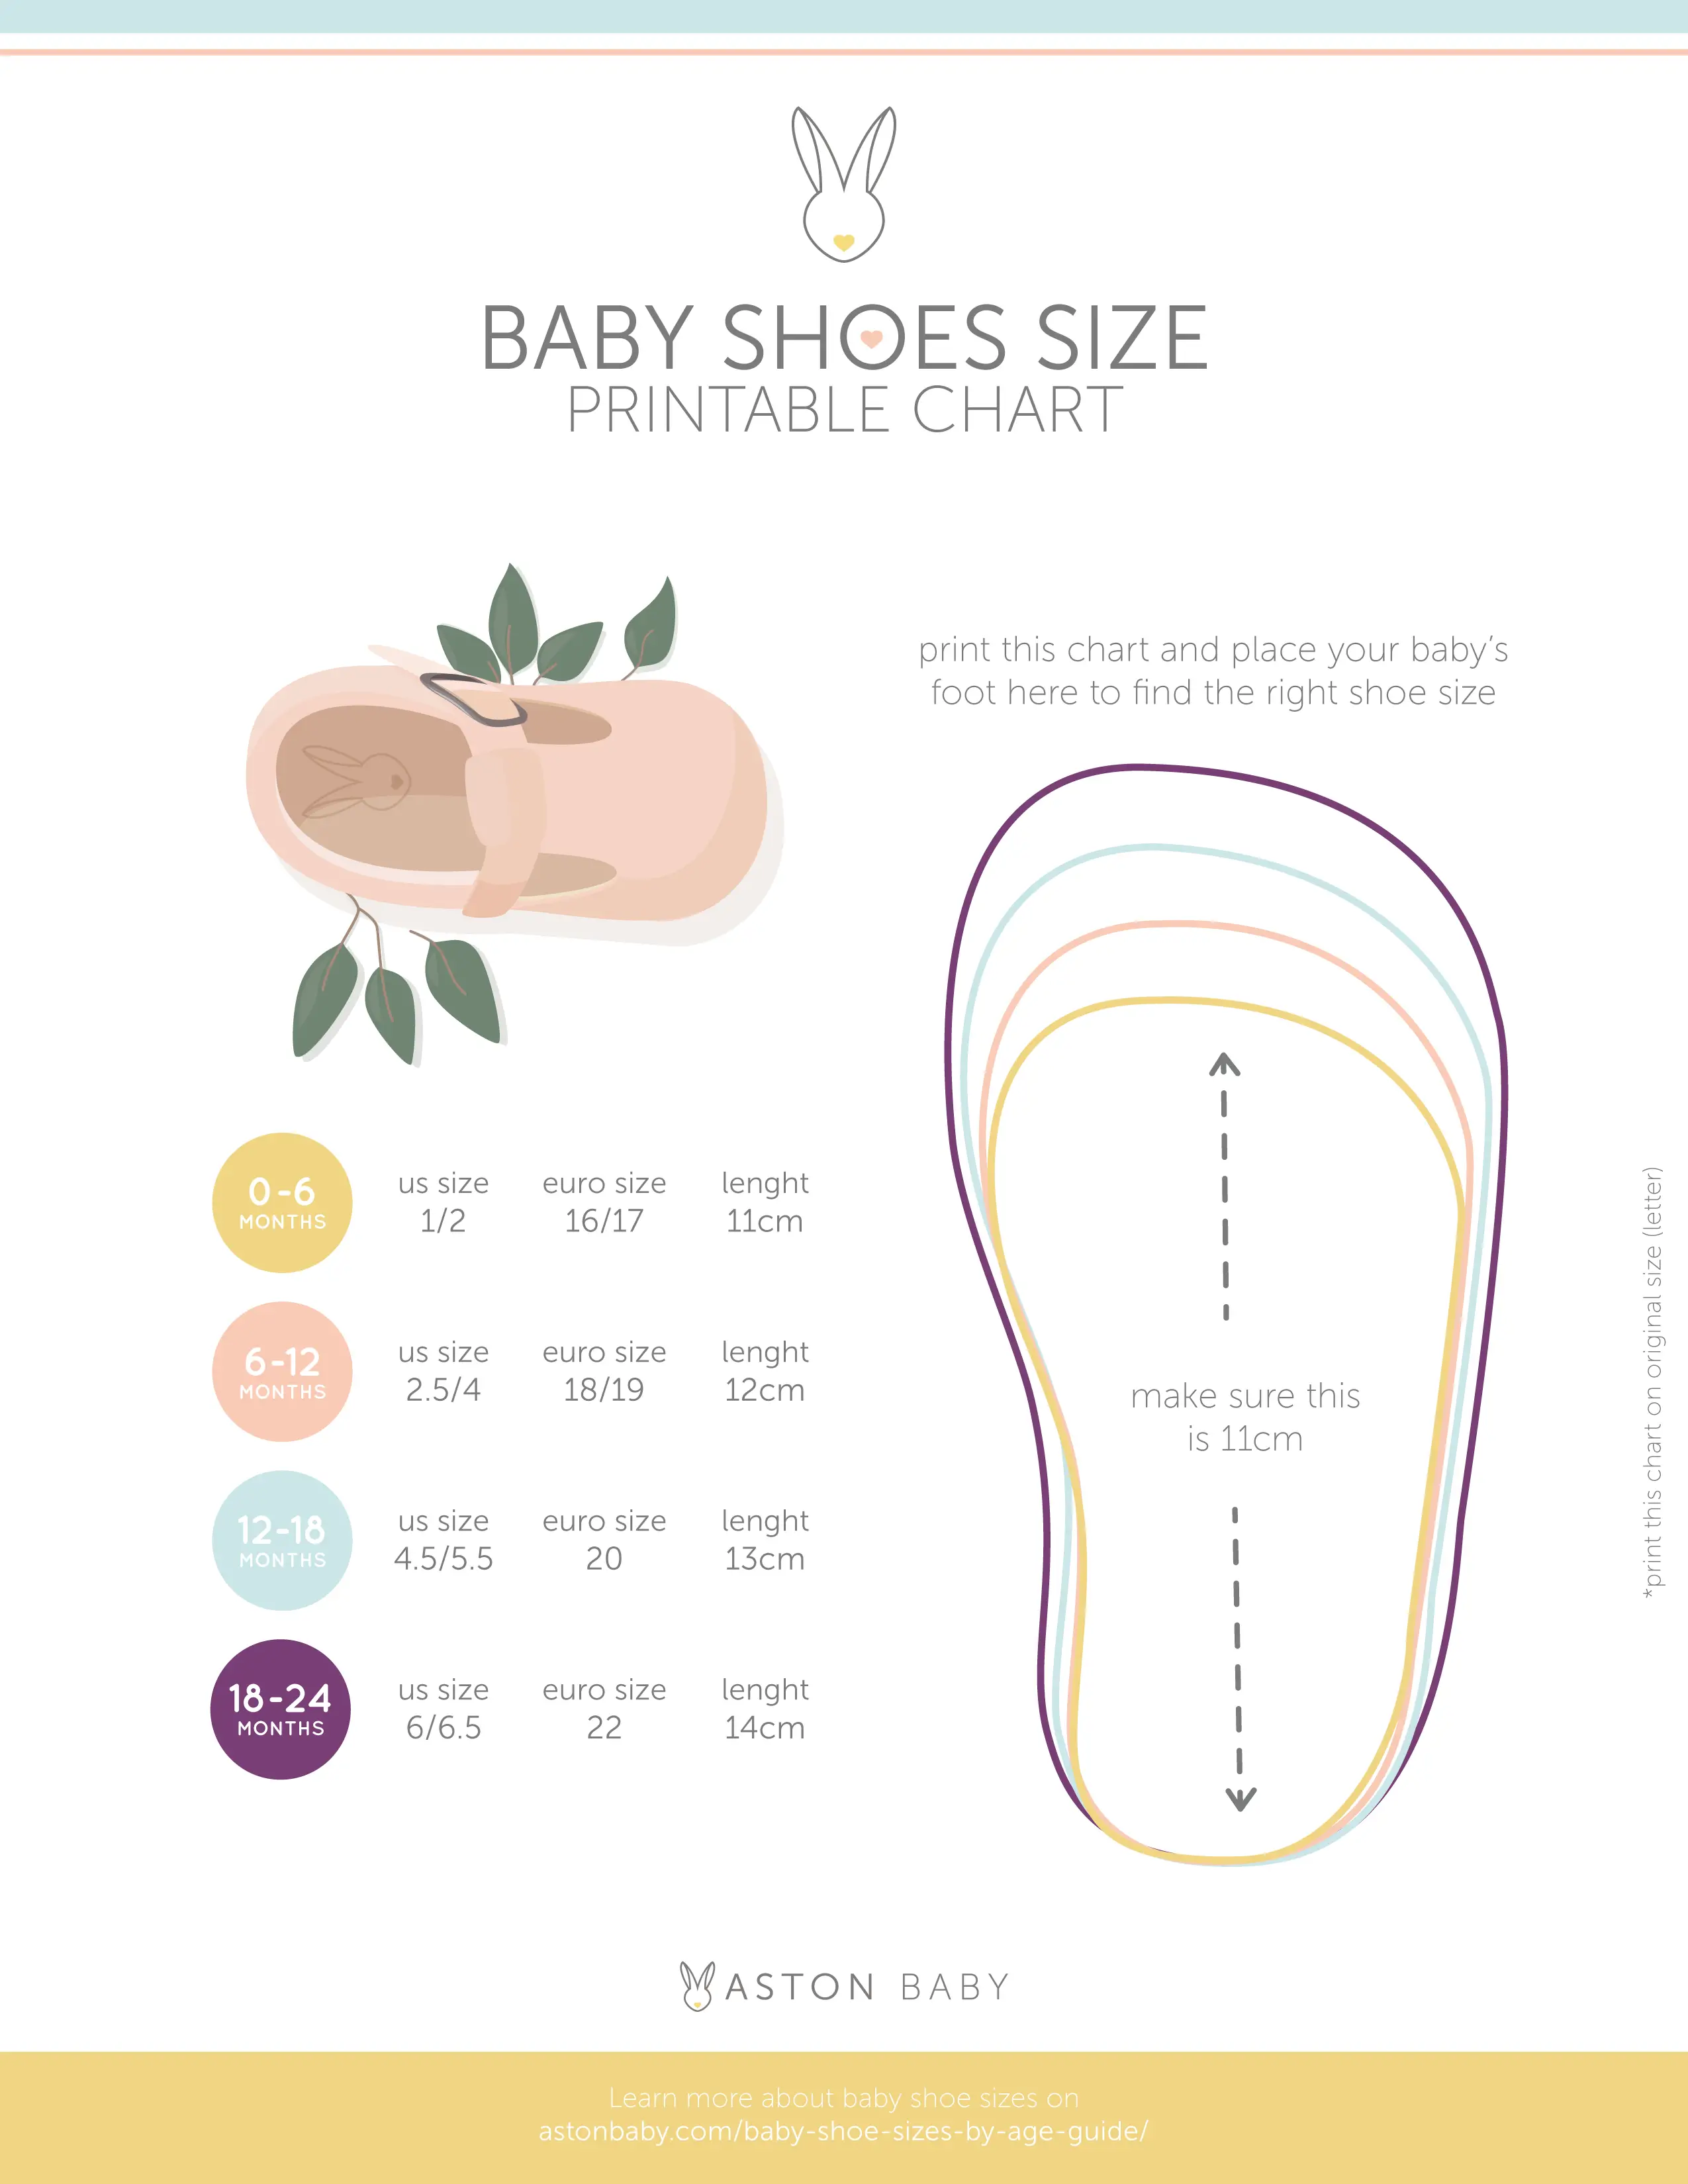 How To Select Baby Shoe Sizes Based On Your Babys Age: A Guide